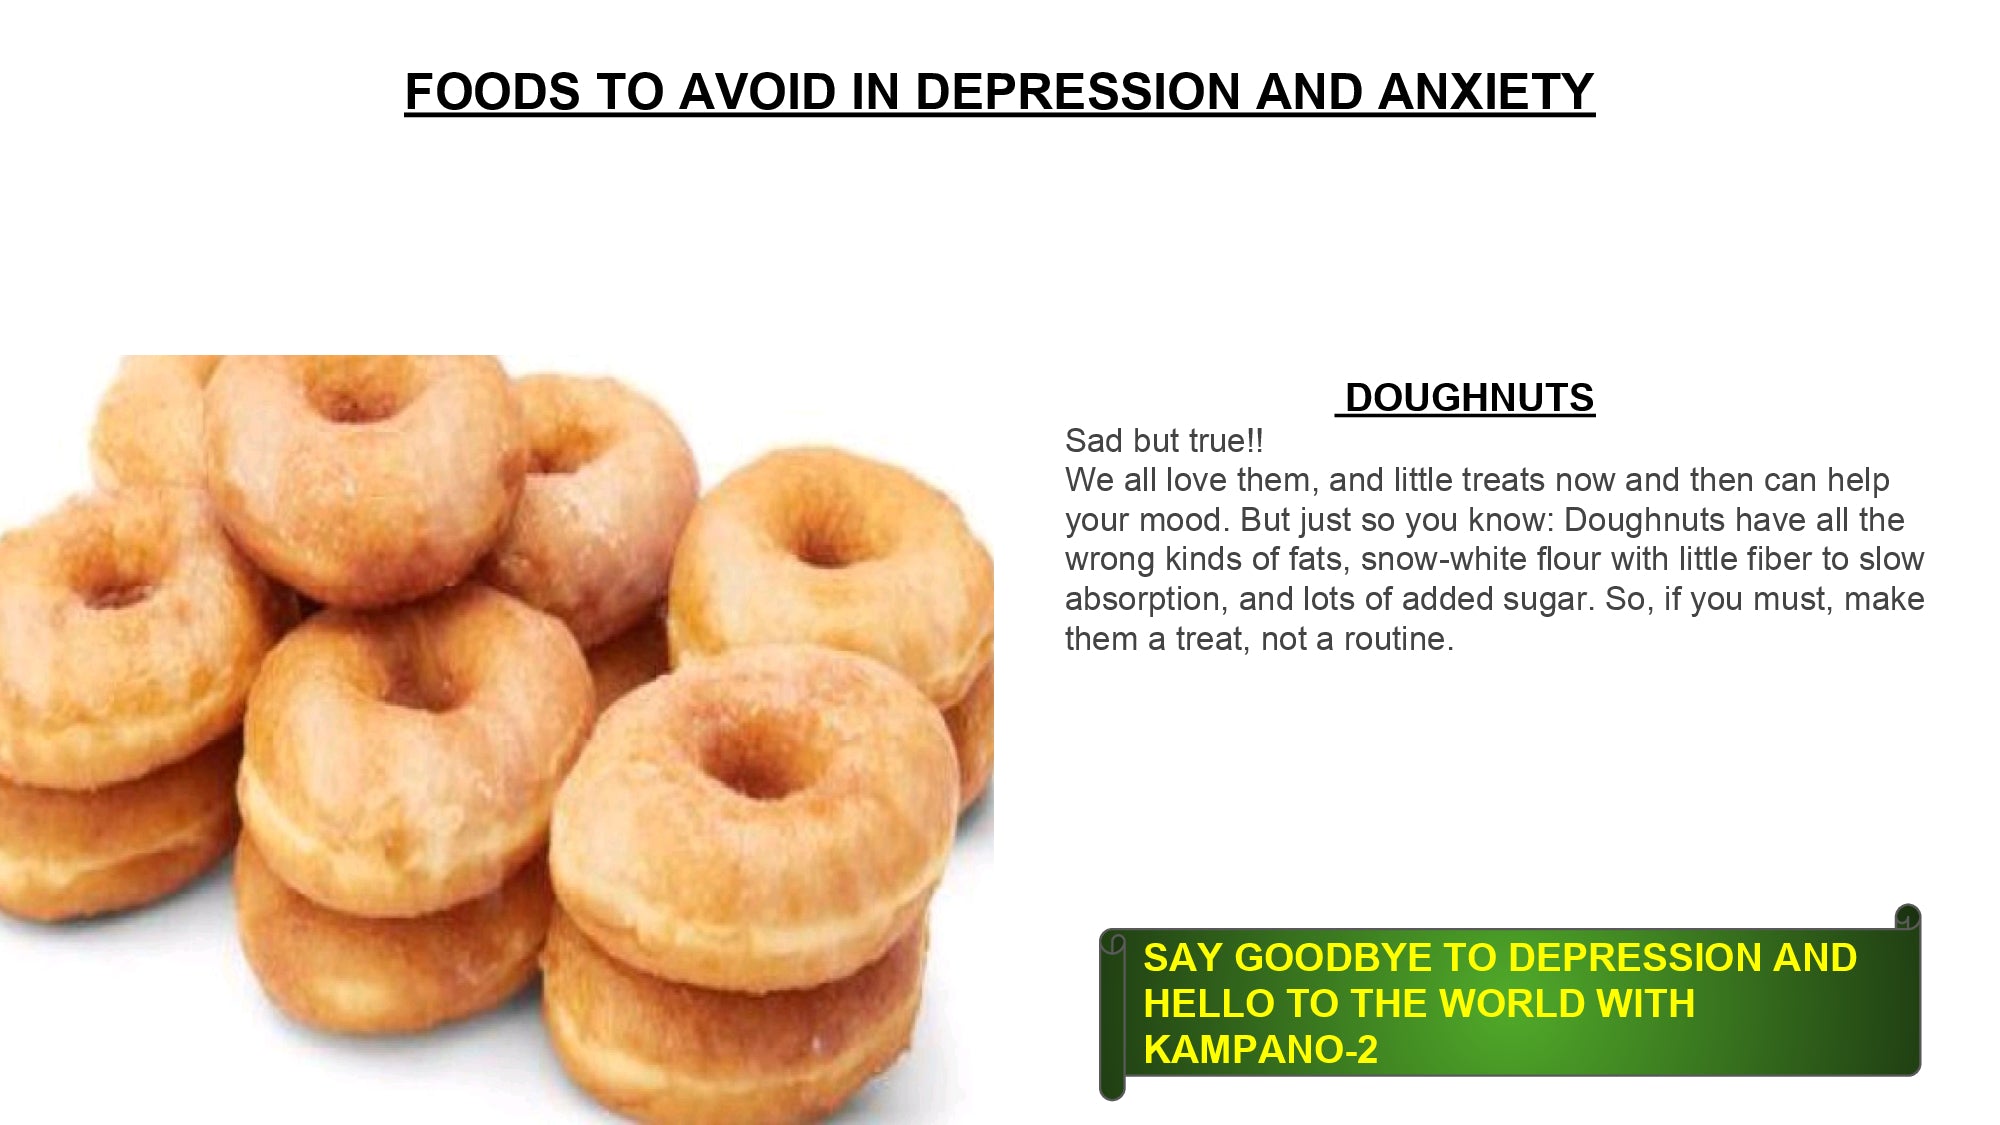 can food fast food donuts cause depression